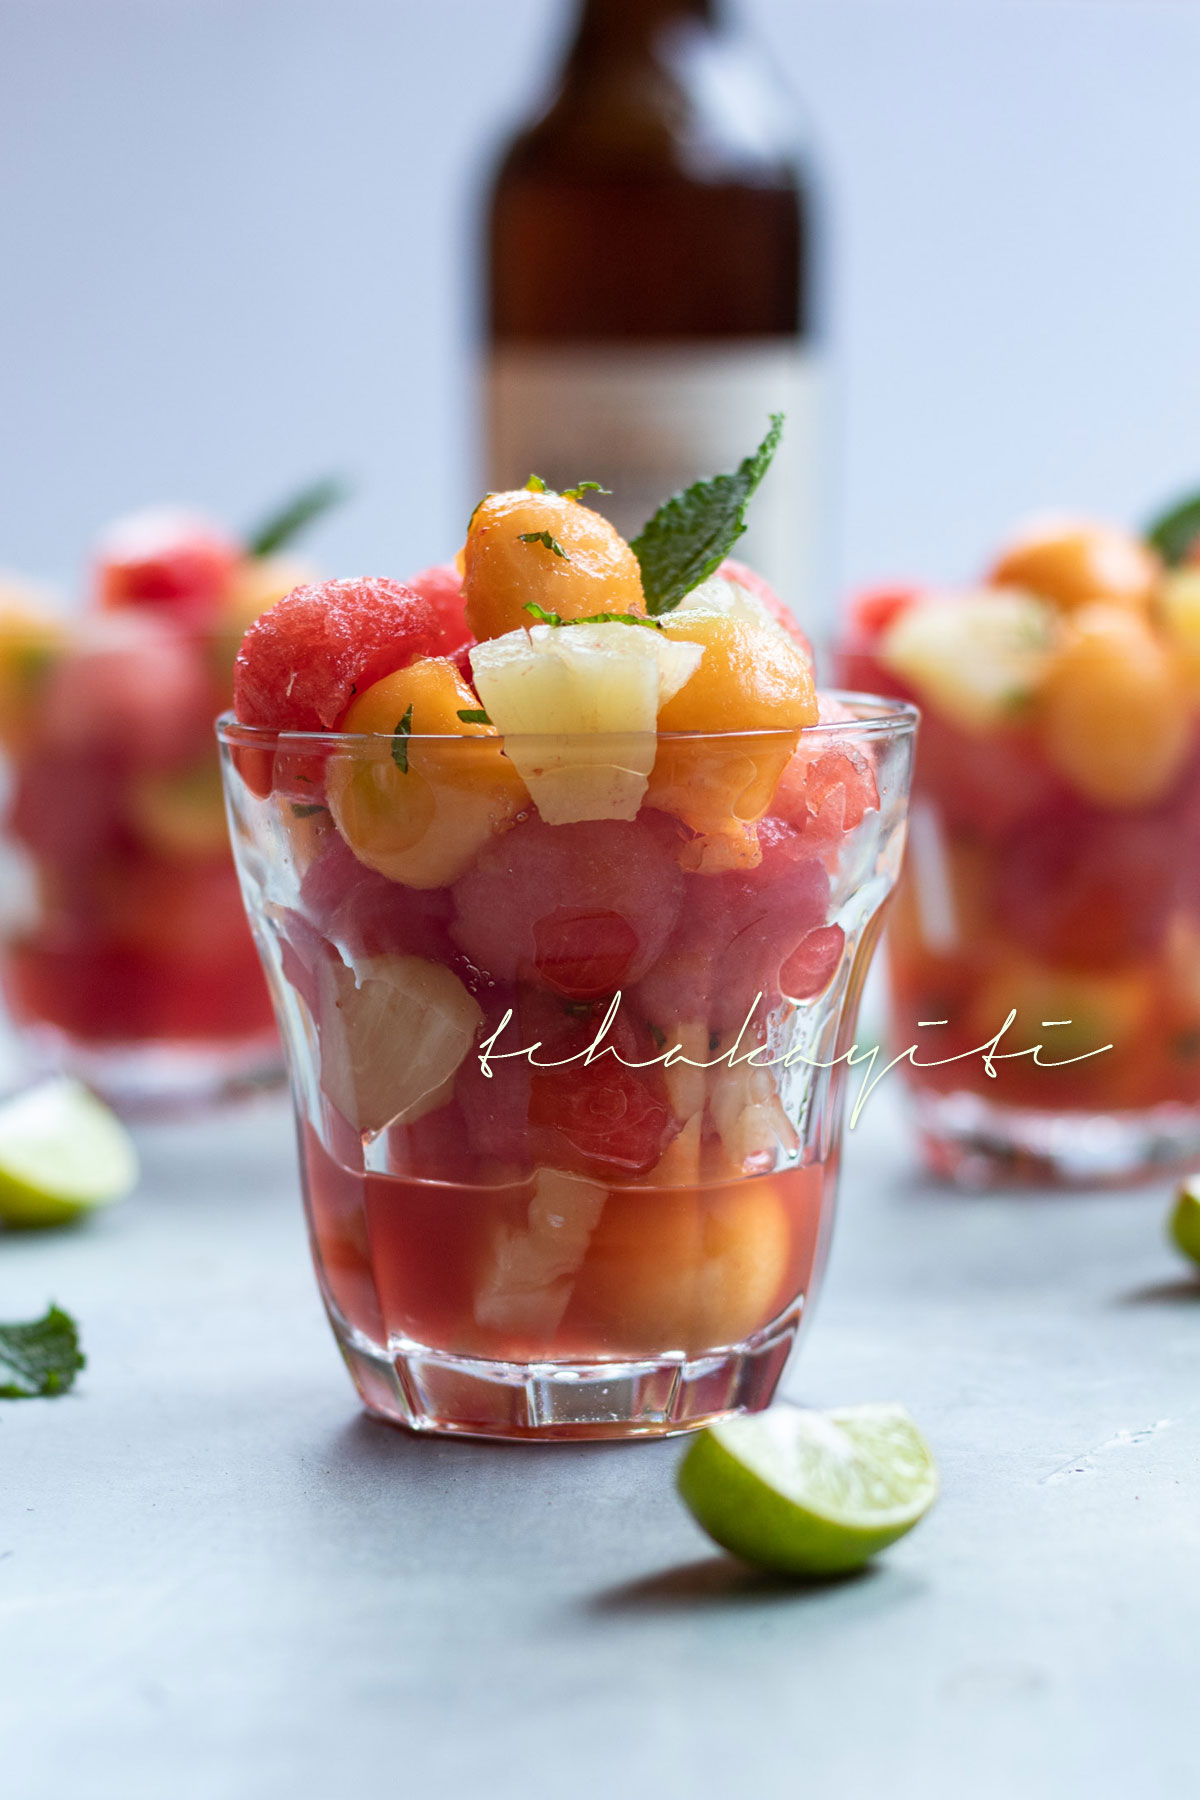 This summer fruit salad is so refreshing. Packed with flavors of watermelon, cantaloupe and pineapple, it is the perfect cool treat. | tchakayiti.com